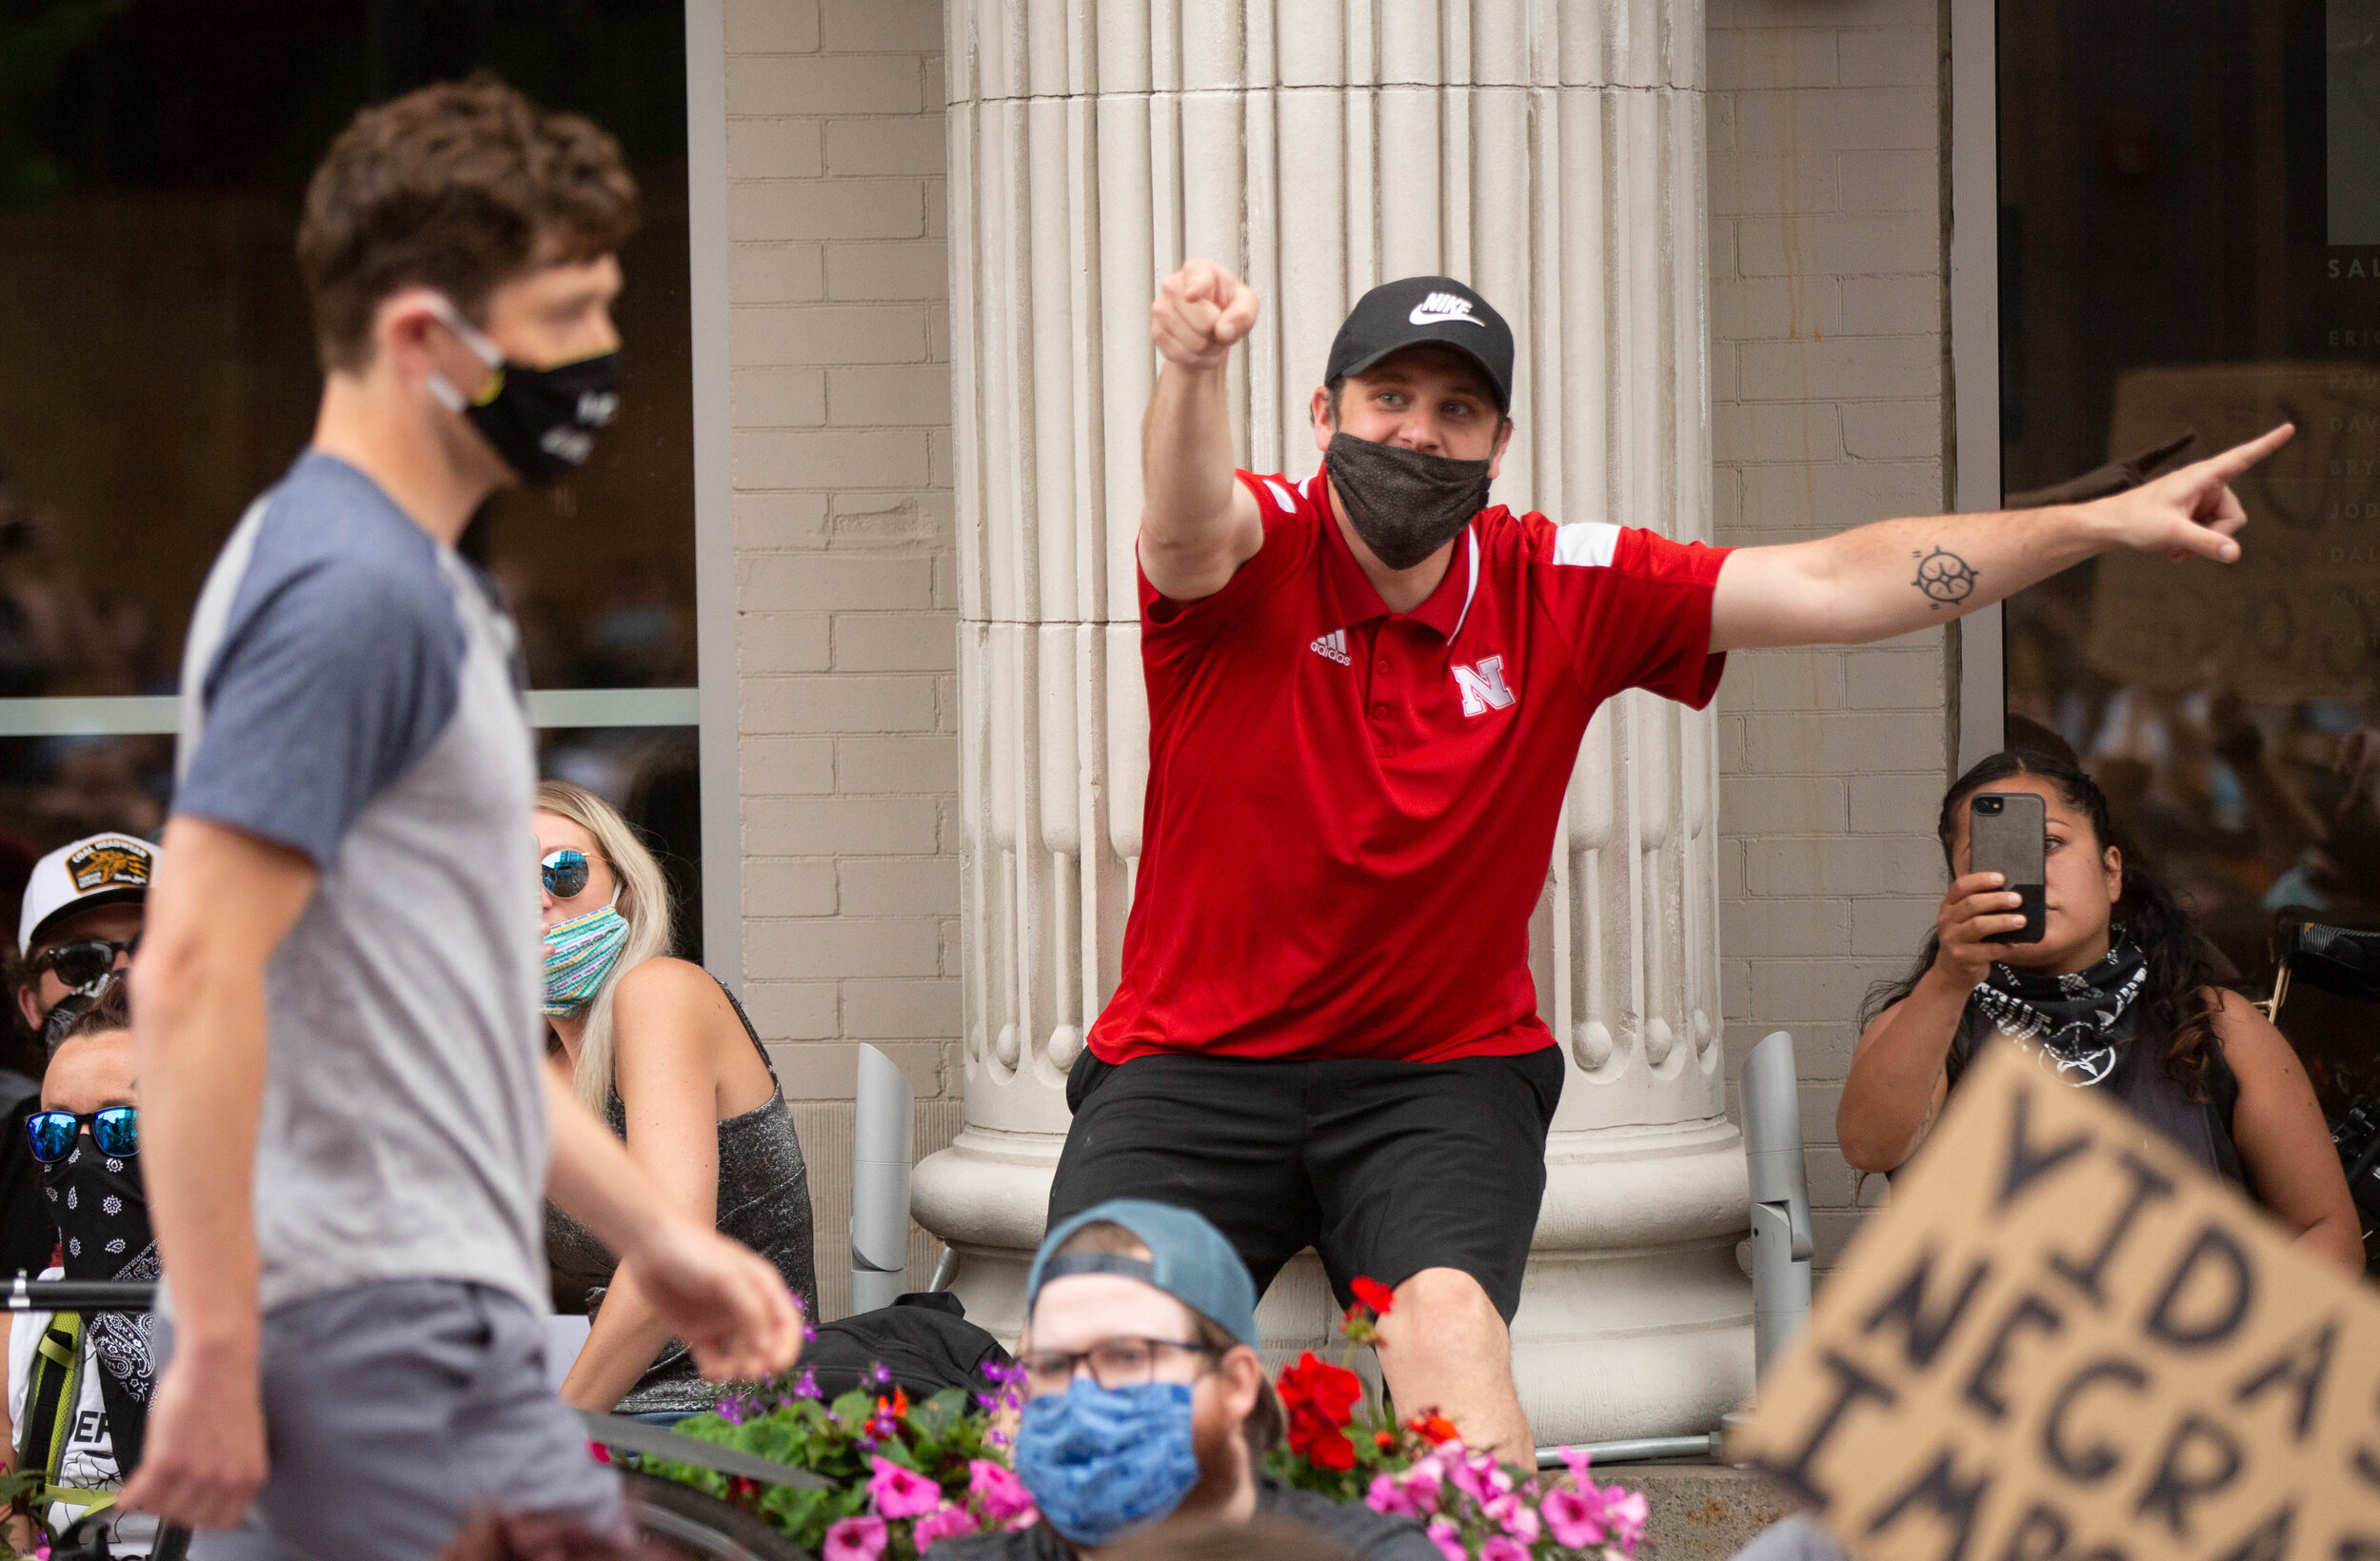  Minneapolis Mayor Jacob Frey walks past angry protesters after he told them he would not defund the Minneapolis Police Department in Minneapolis, Minnesota on Jun 6, 2020. 